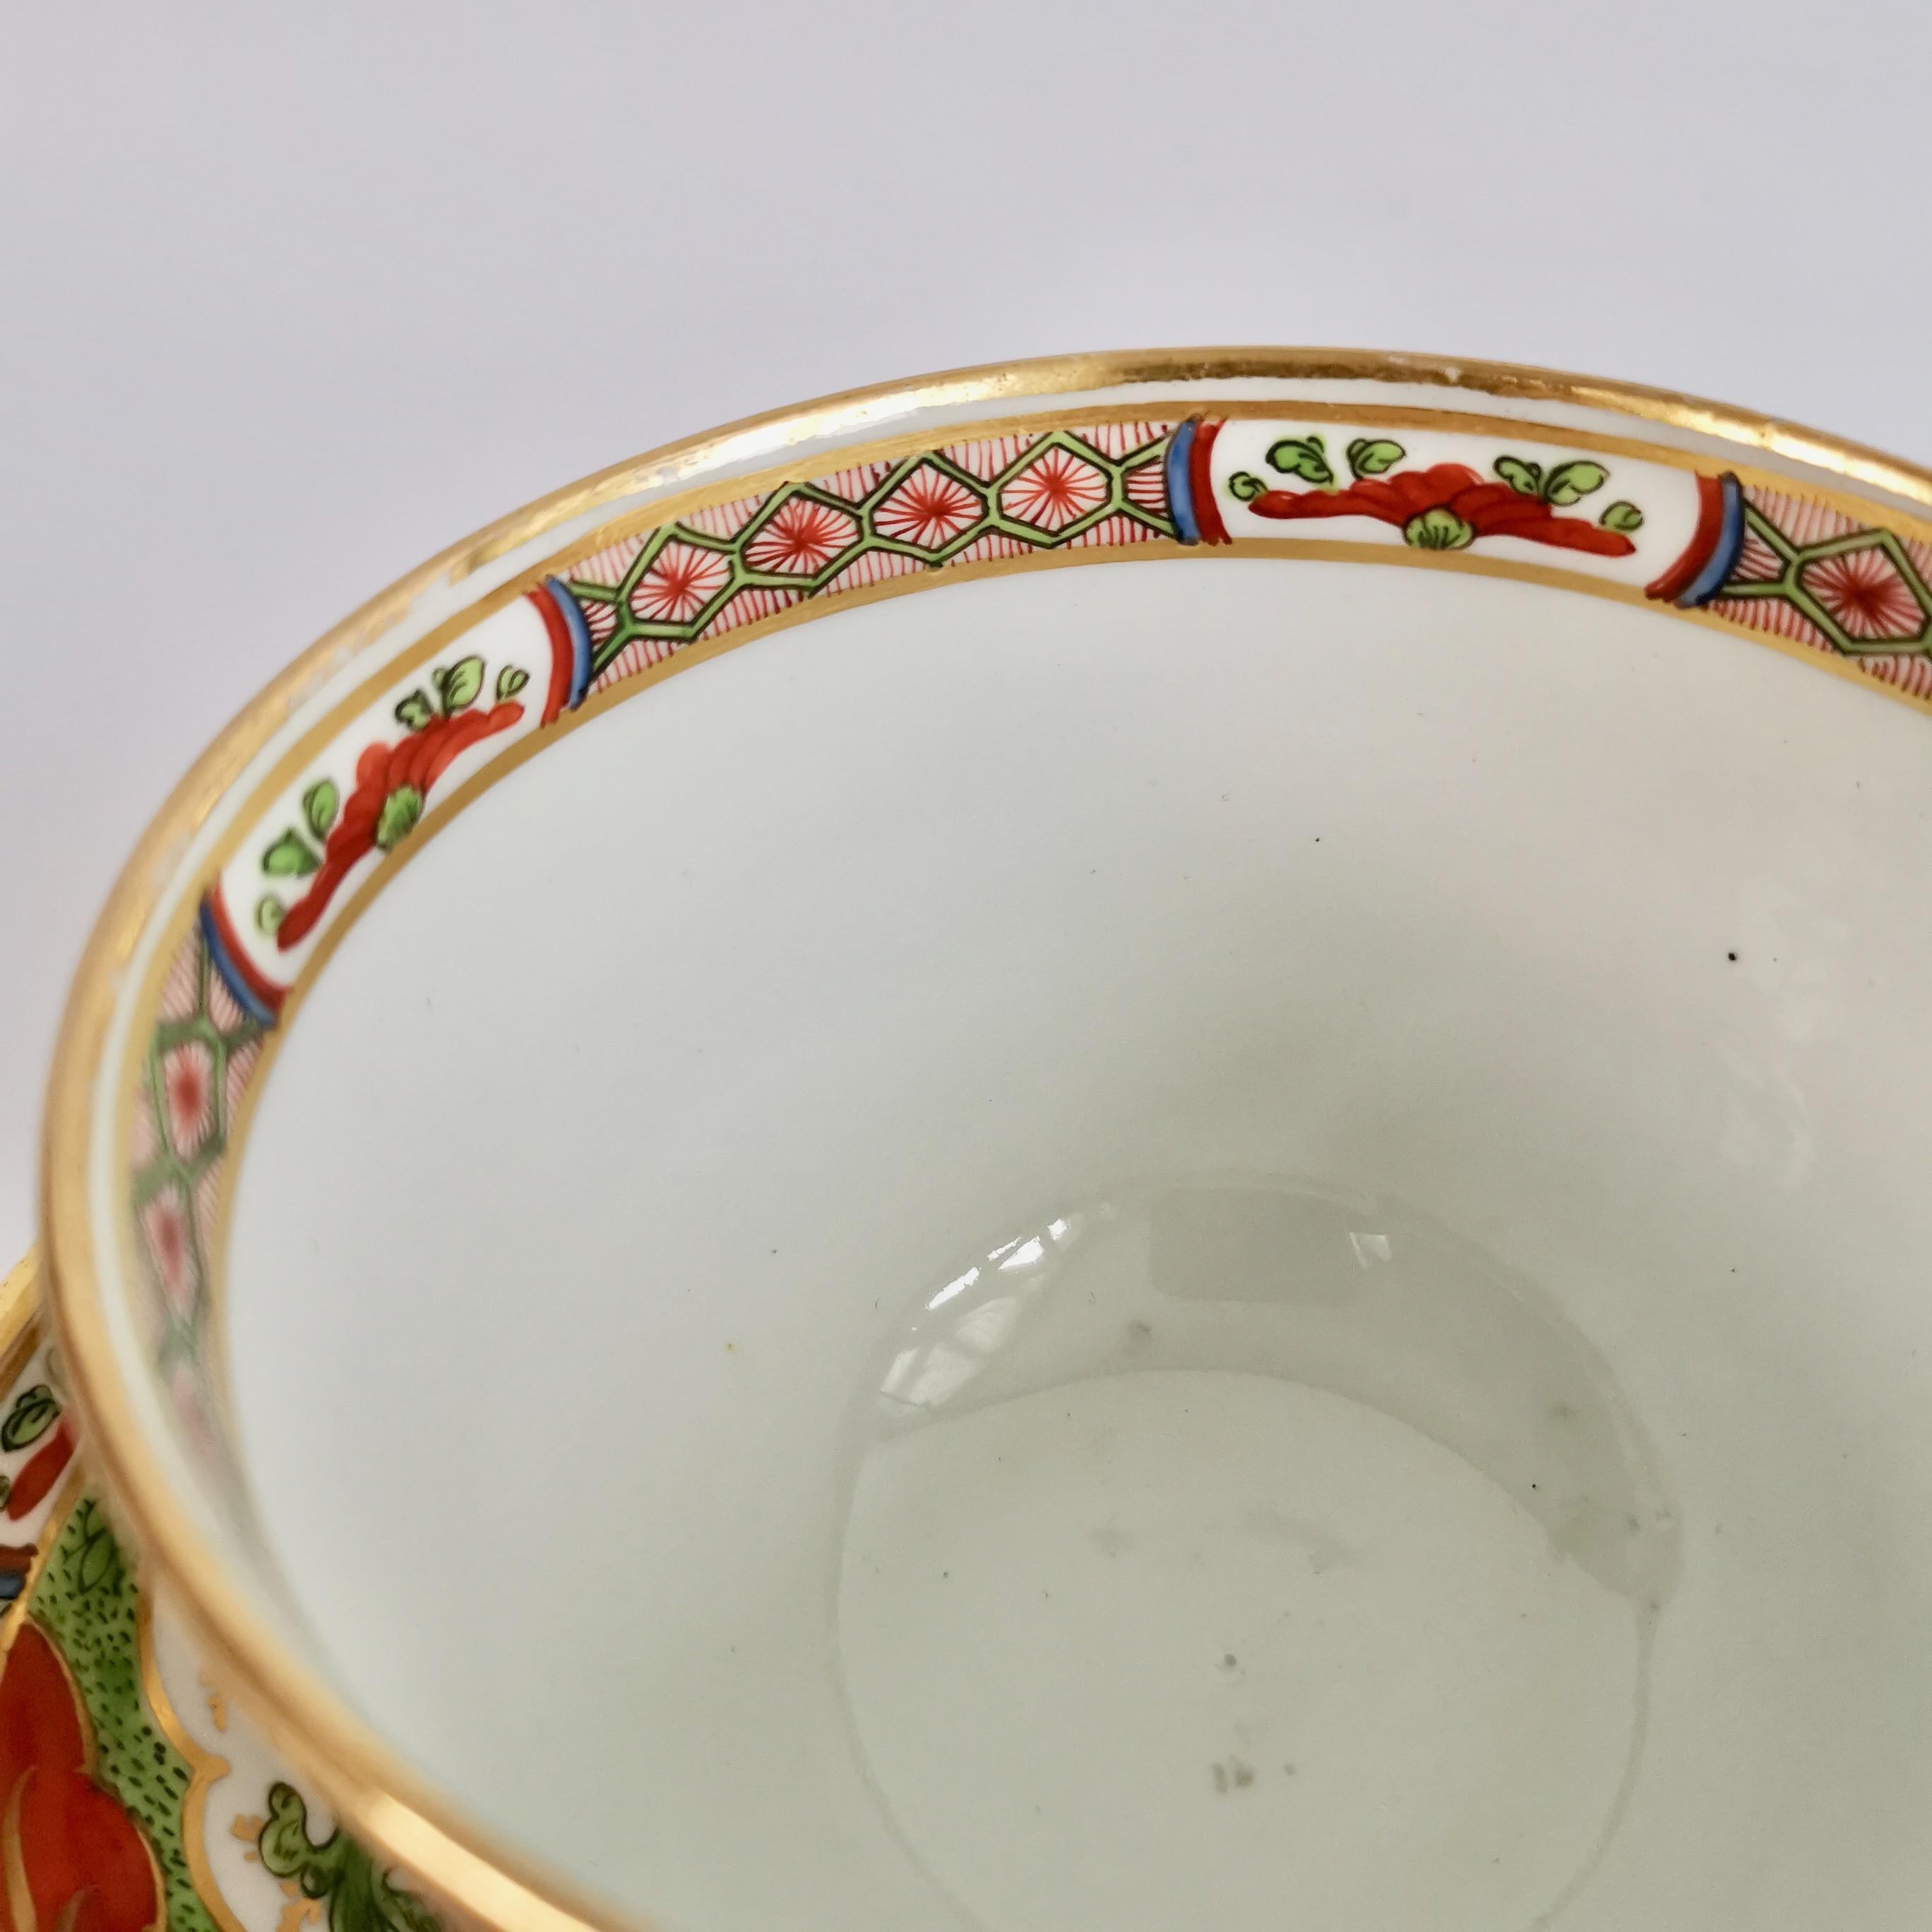 Chamberlains Worcester Porcelain Breakfast Cup, Dragons in Compartments, Ca 1800 9